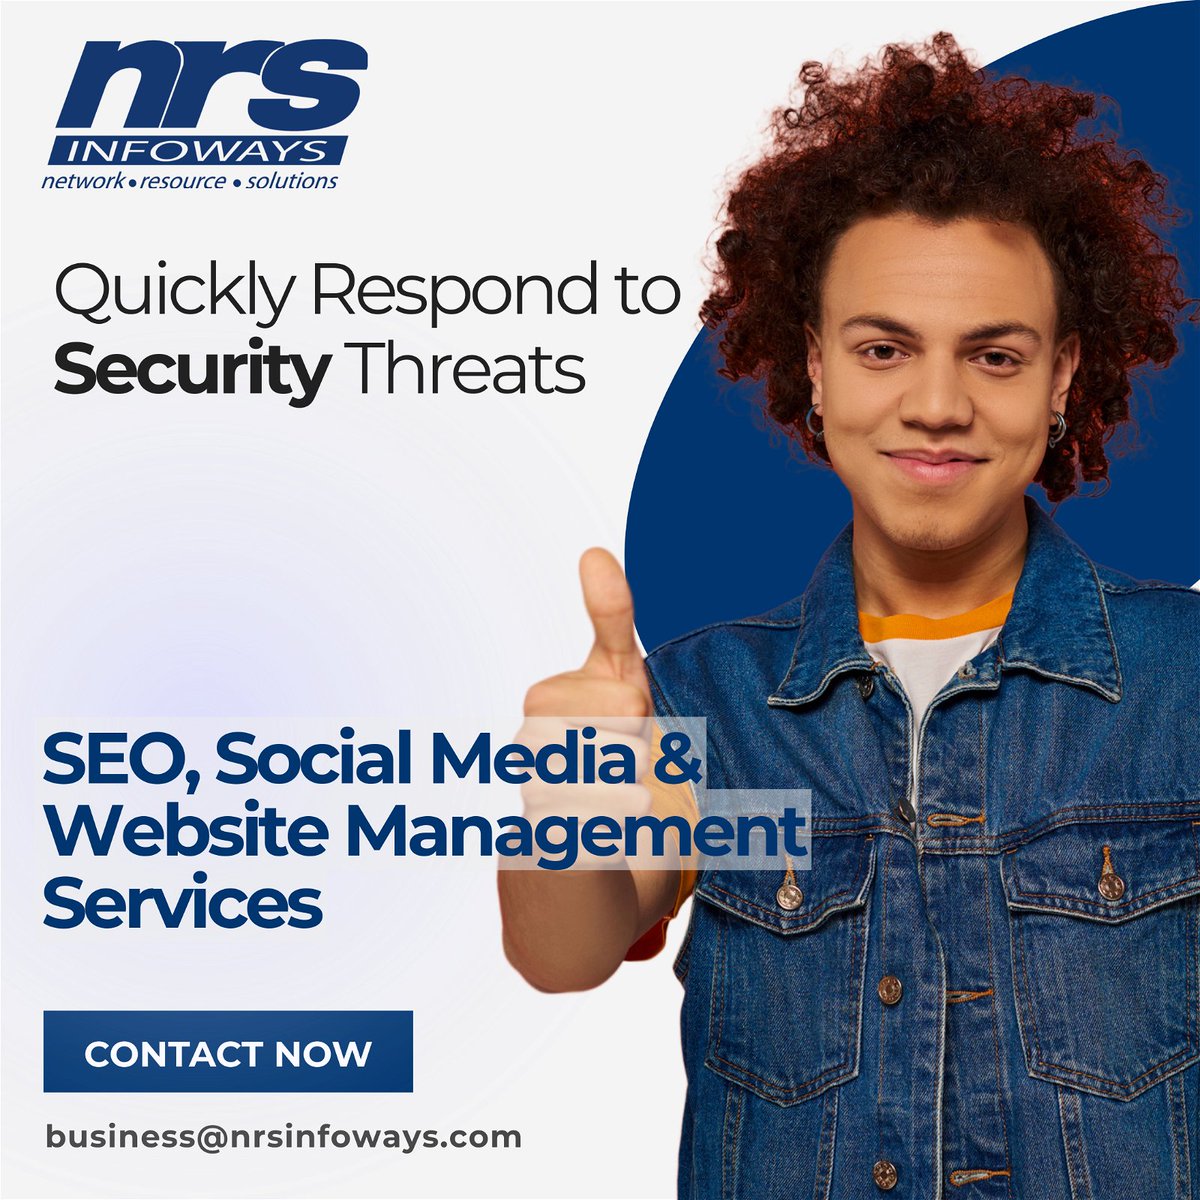 Quickly Respond to Security Threats

Timely response to security threats is crucial to minimize damage. Have a plan in place to handle potential security incidents.

We can help
Lets discuss business@nrsinfoways.com
#security #threatresponse #cybersecurity #seo #nrsinfoways